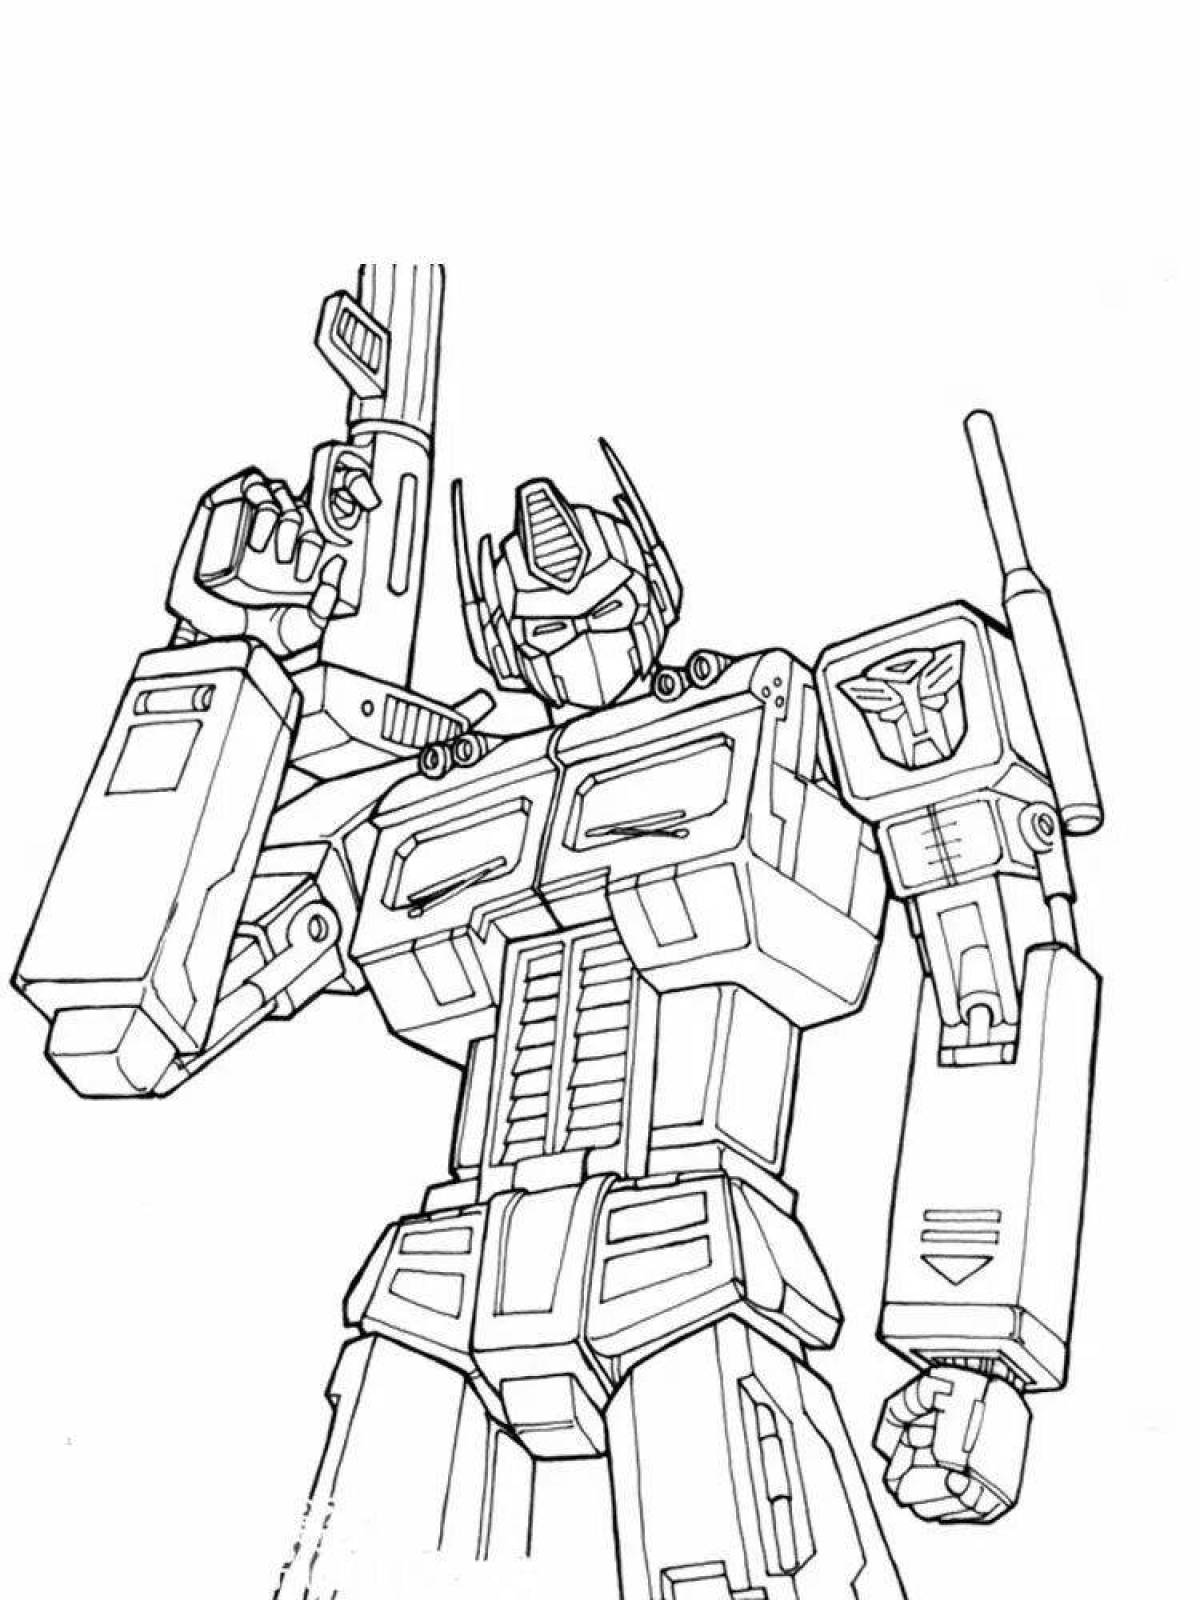 Colorful painted transformers prime coloring page